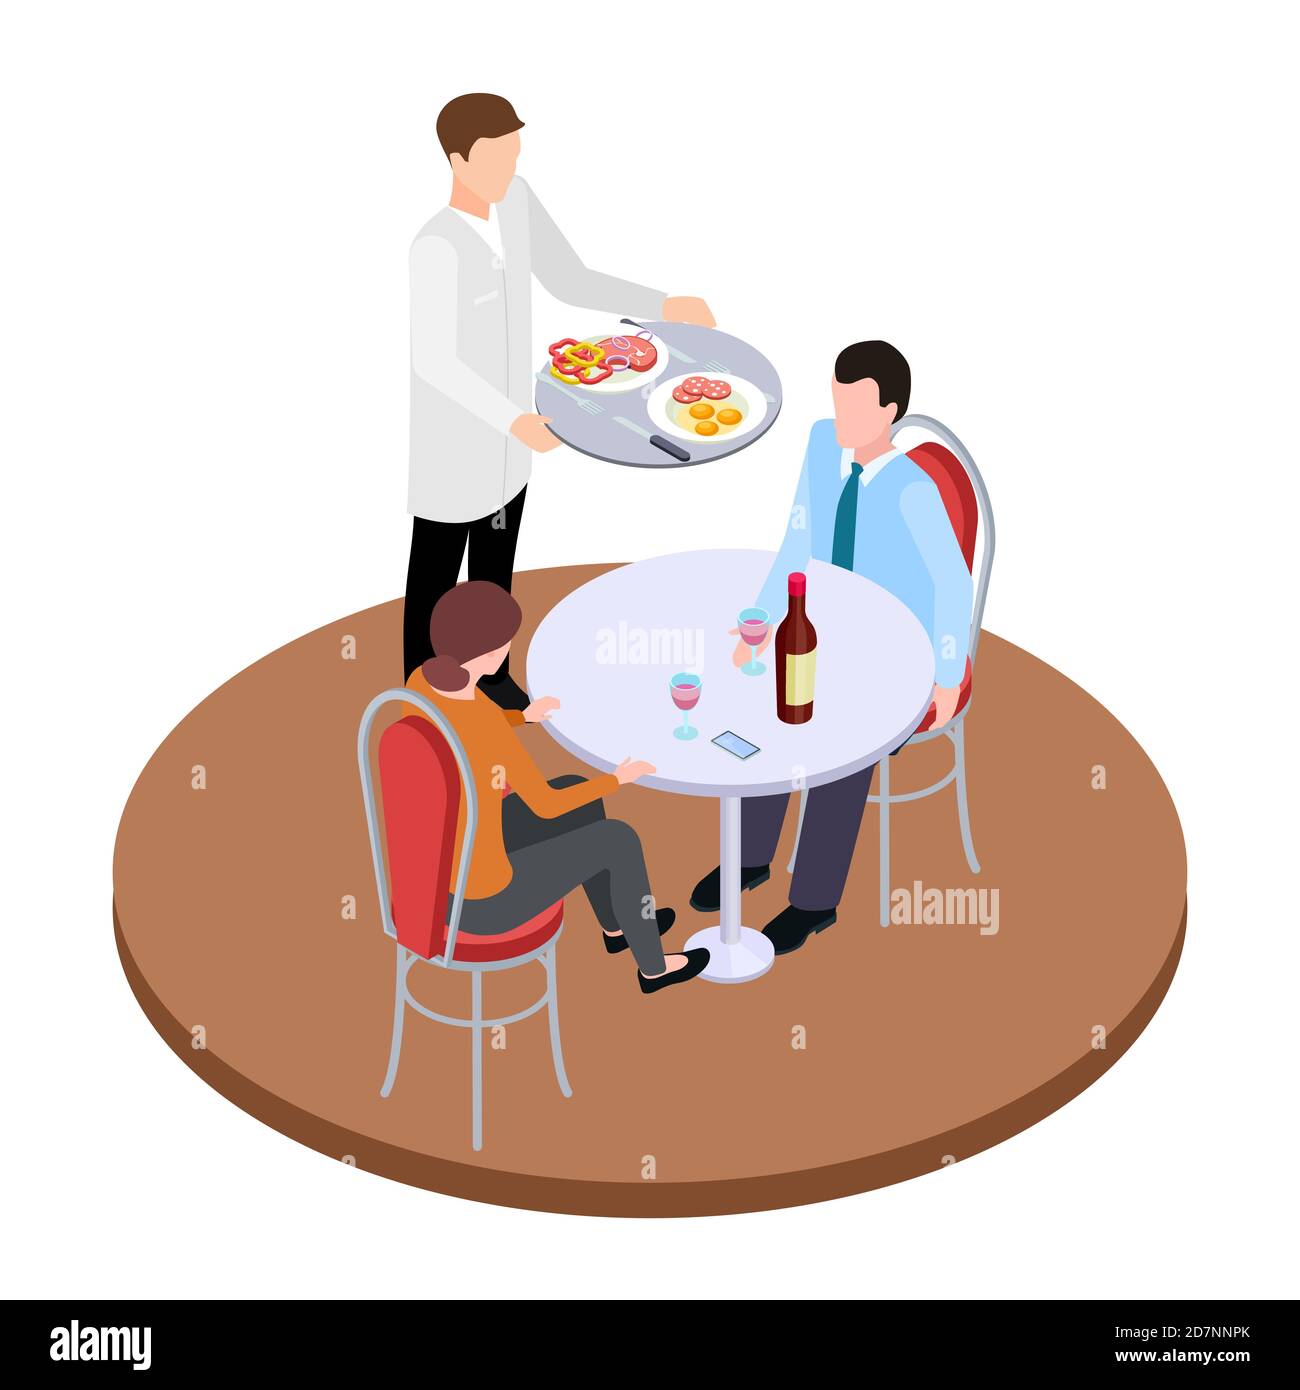 Romantic dating in restaurant isometric vector illustration. Romantic dating dinner couple man and woman Stock Vector